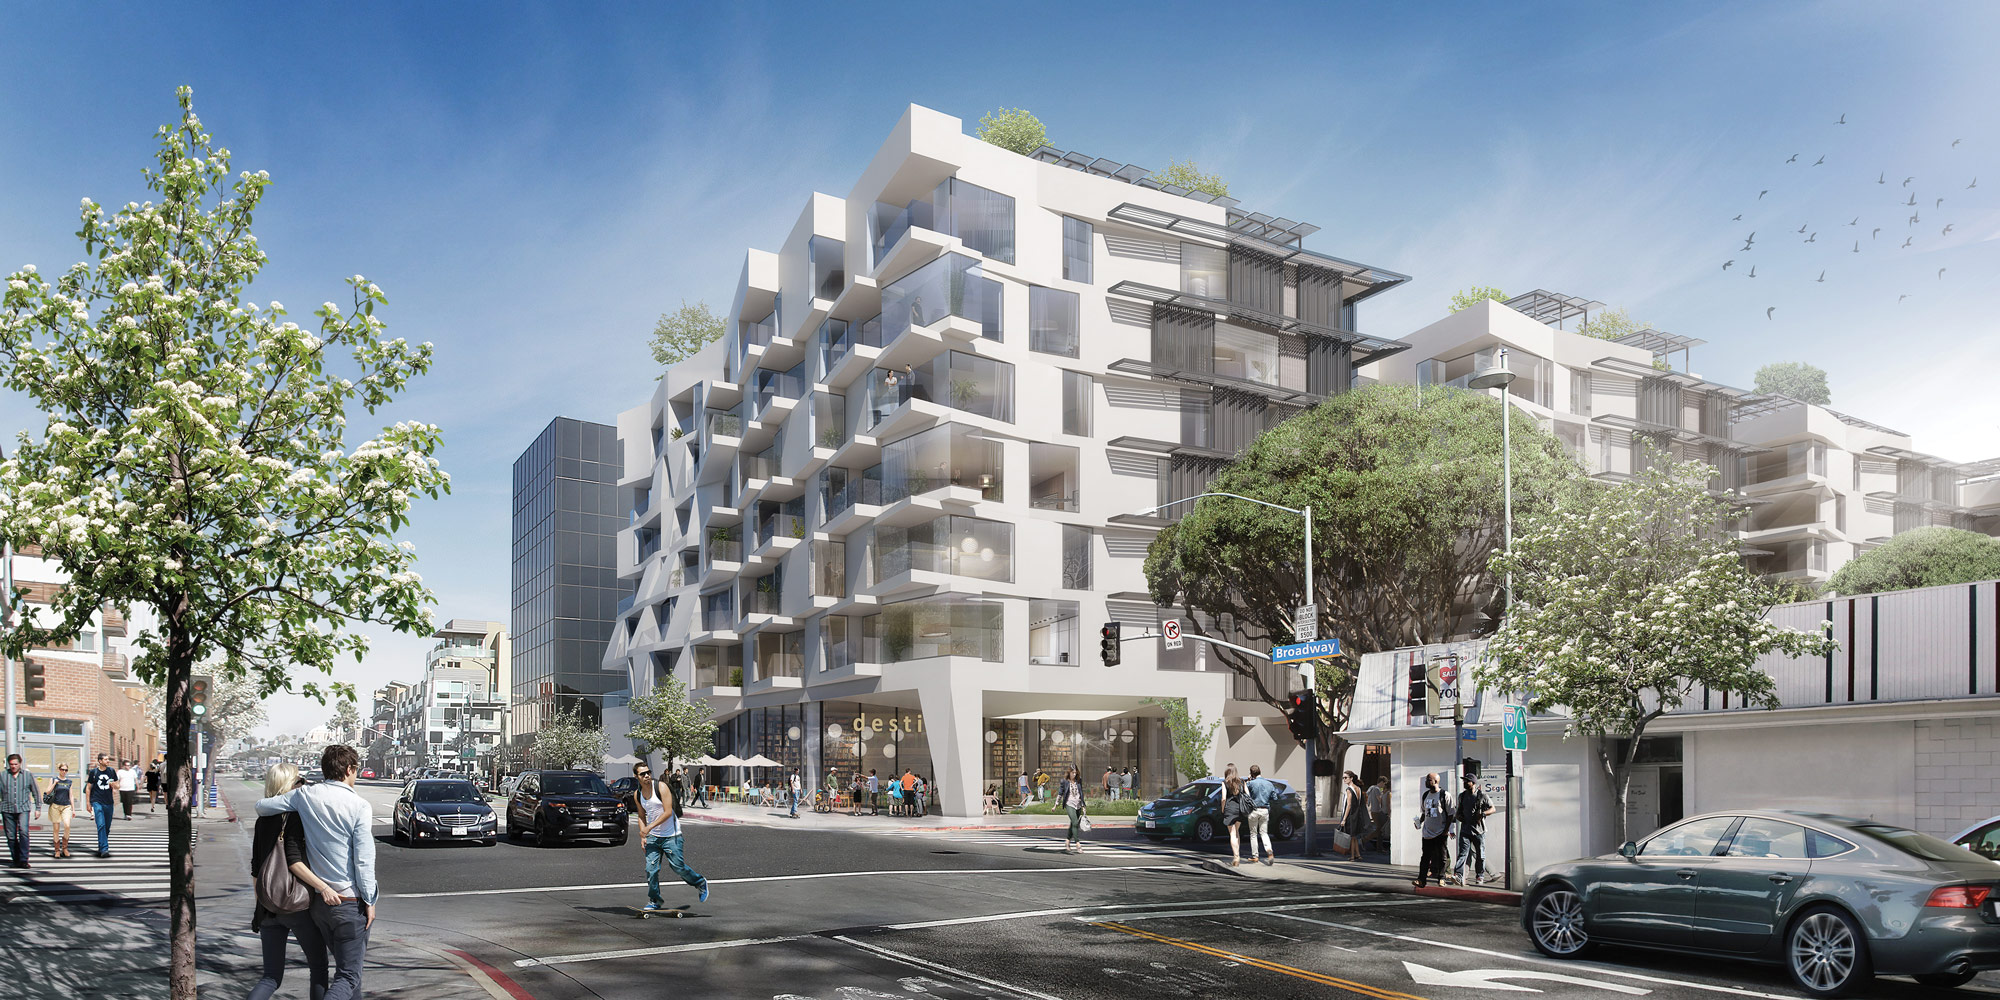 After a lengthy vetting process in development-averse Santa Monica, Koning Eizenberg Architects was granted approval in May to proceed with construction on 500 Broadway, a 249-unit market rate complex being developed in tow with a separate, 64-unit deed-restricted, off-site affordable housing component. (Courtesy Koning Eizenberg Architects)